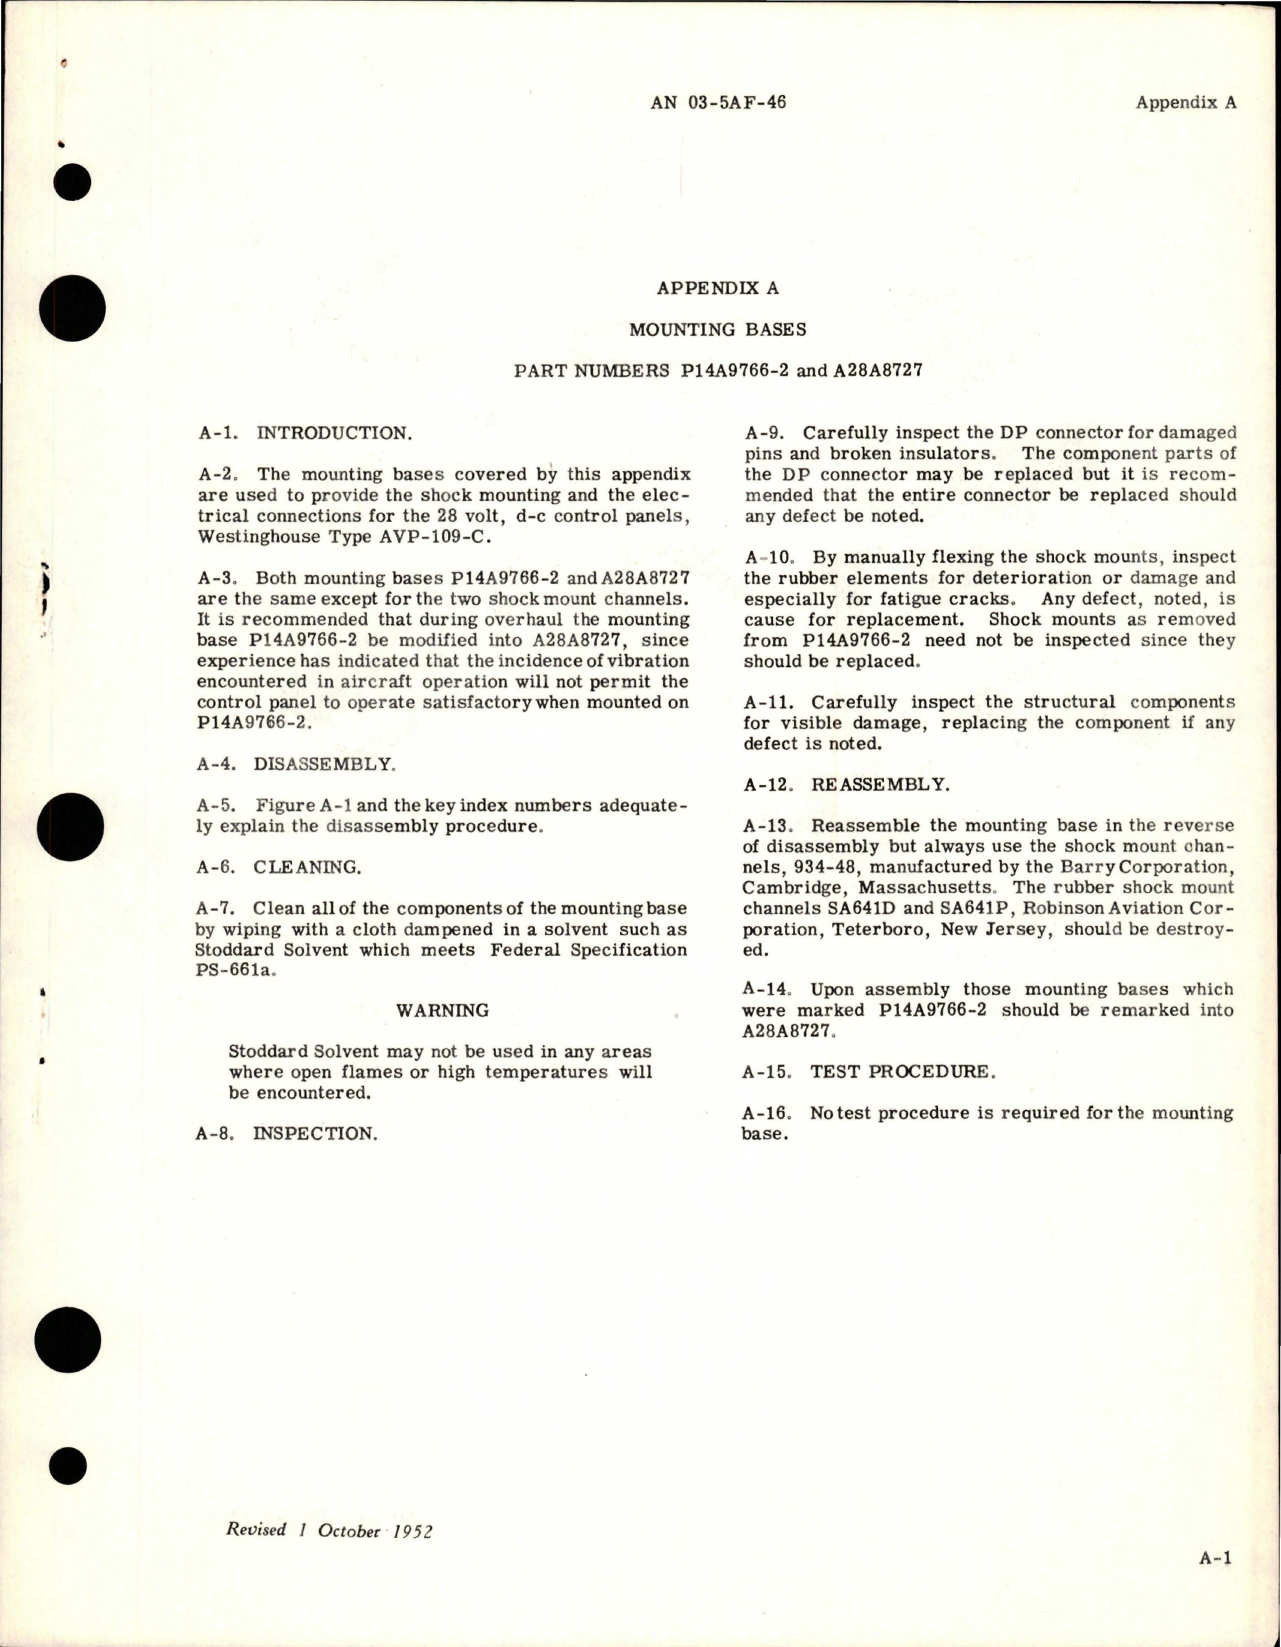 Sample page 5 from AirCorps Library document: Overhaul Instructions for Regulator and Control Panel with Mounting Bases - Type AVP-109-C